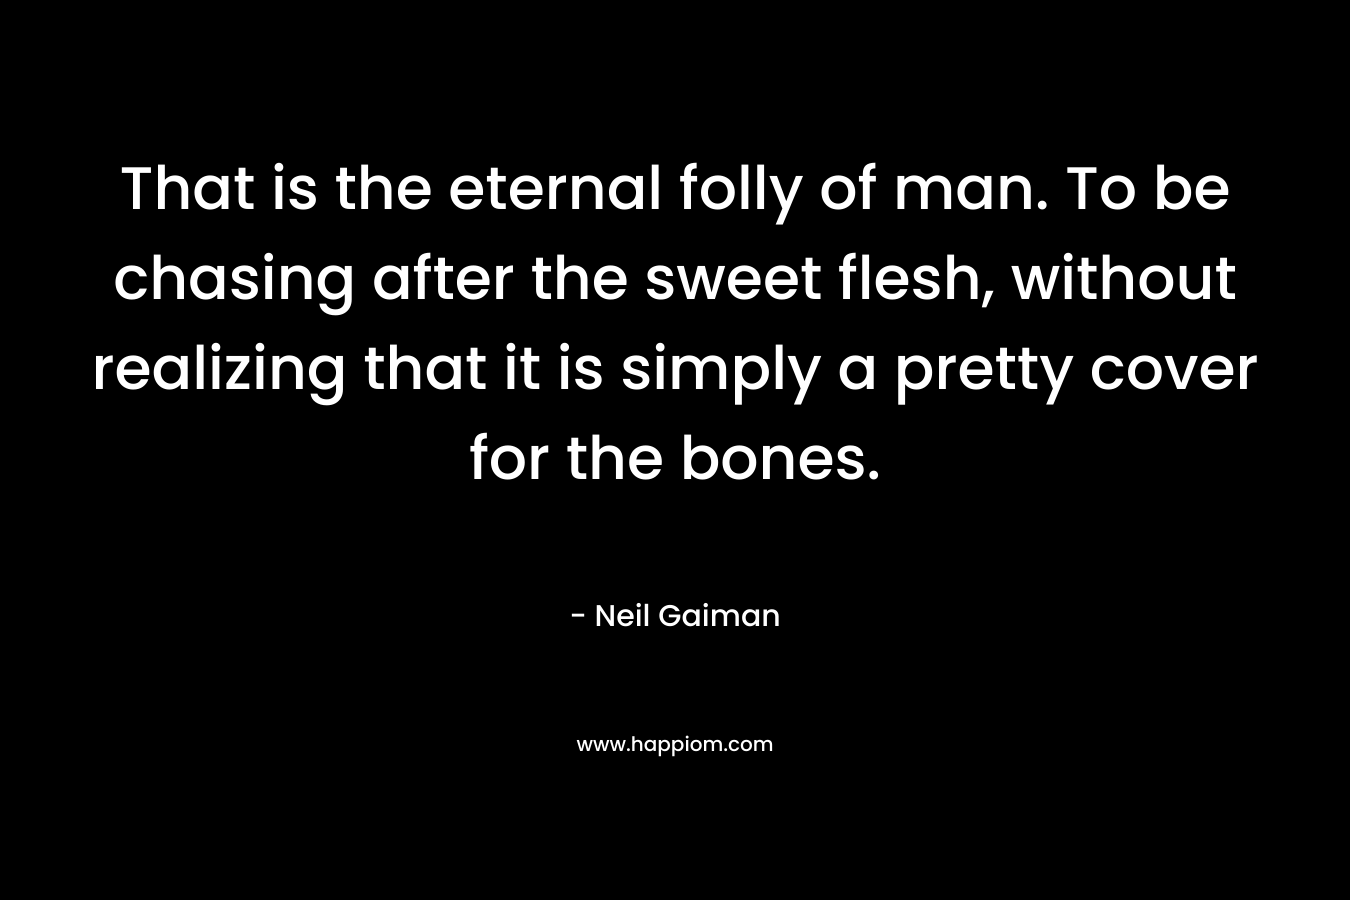 That is the eternal folly of man. To be chasing after the sweet flesh, without realizing that it is simply a pretty cover for the bones.